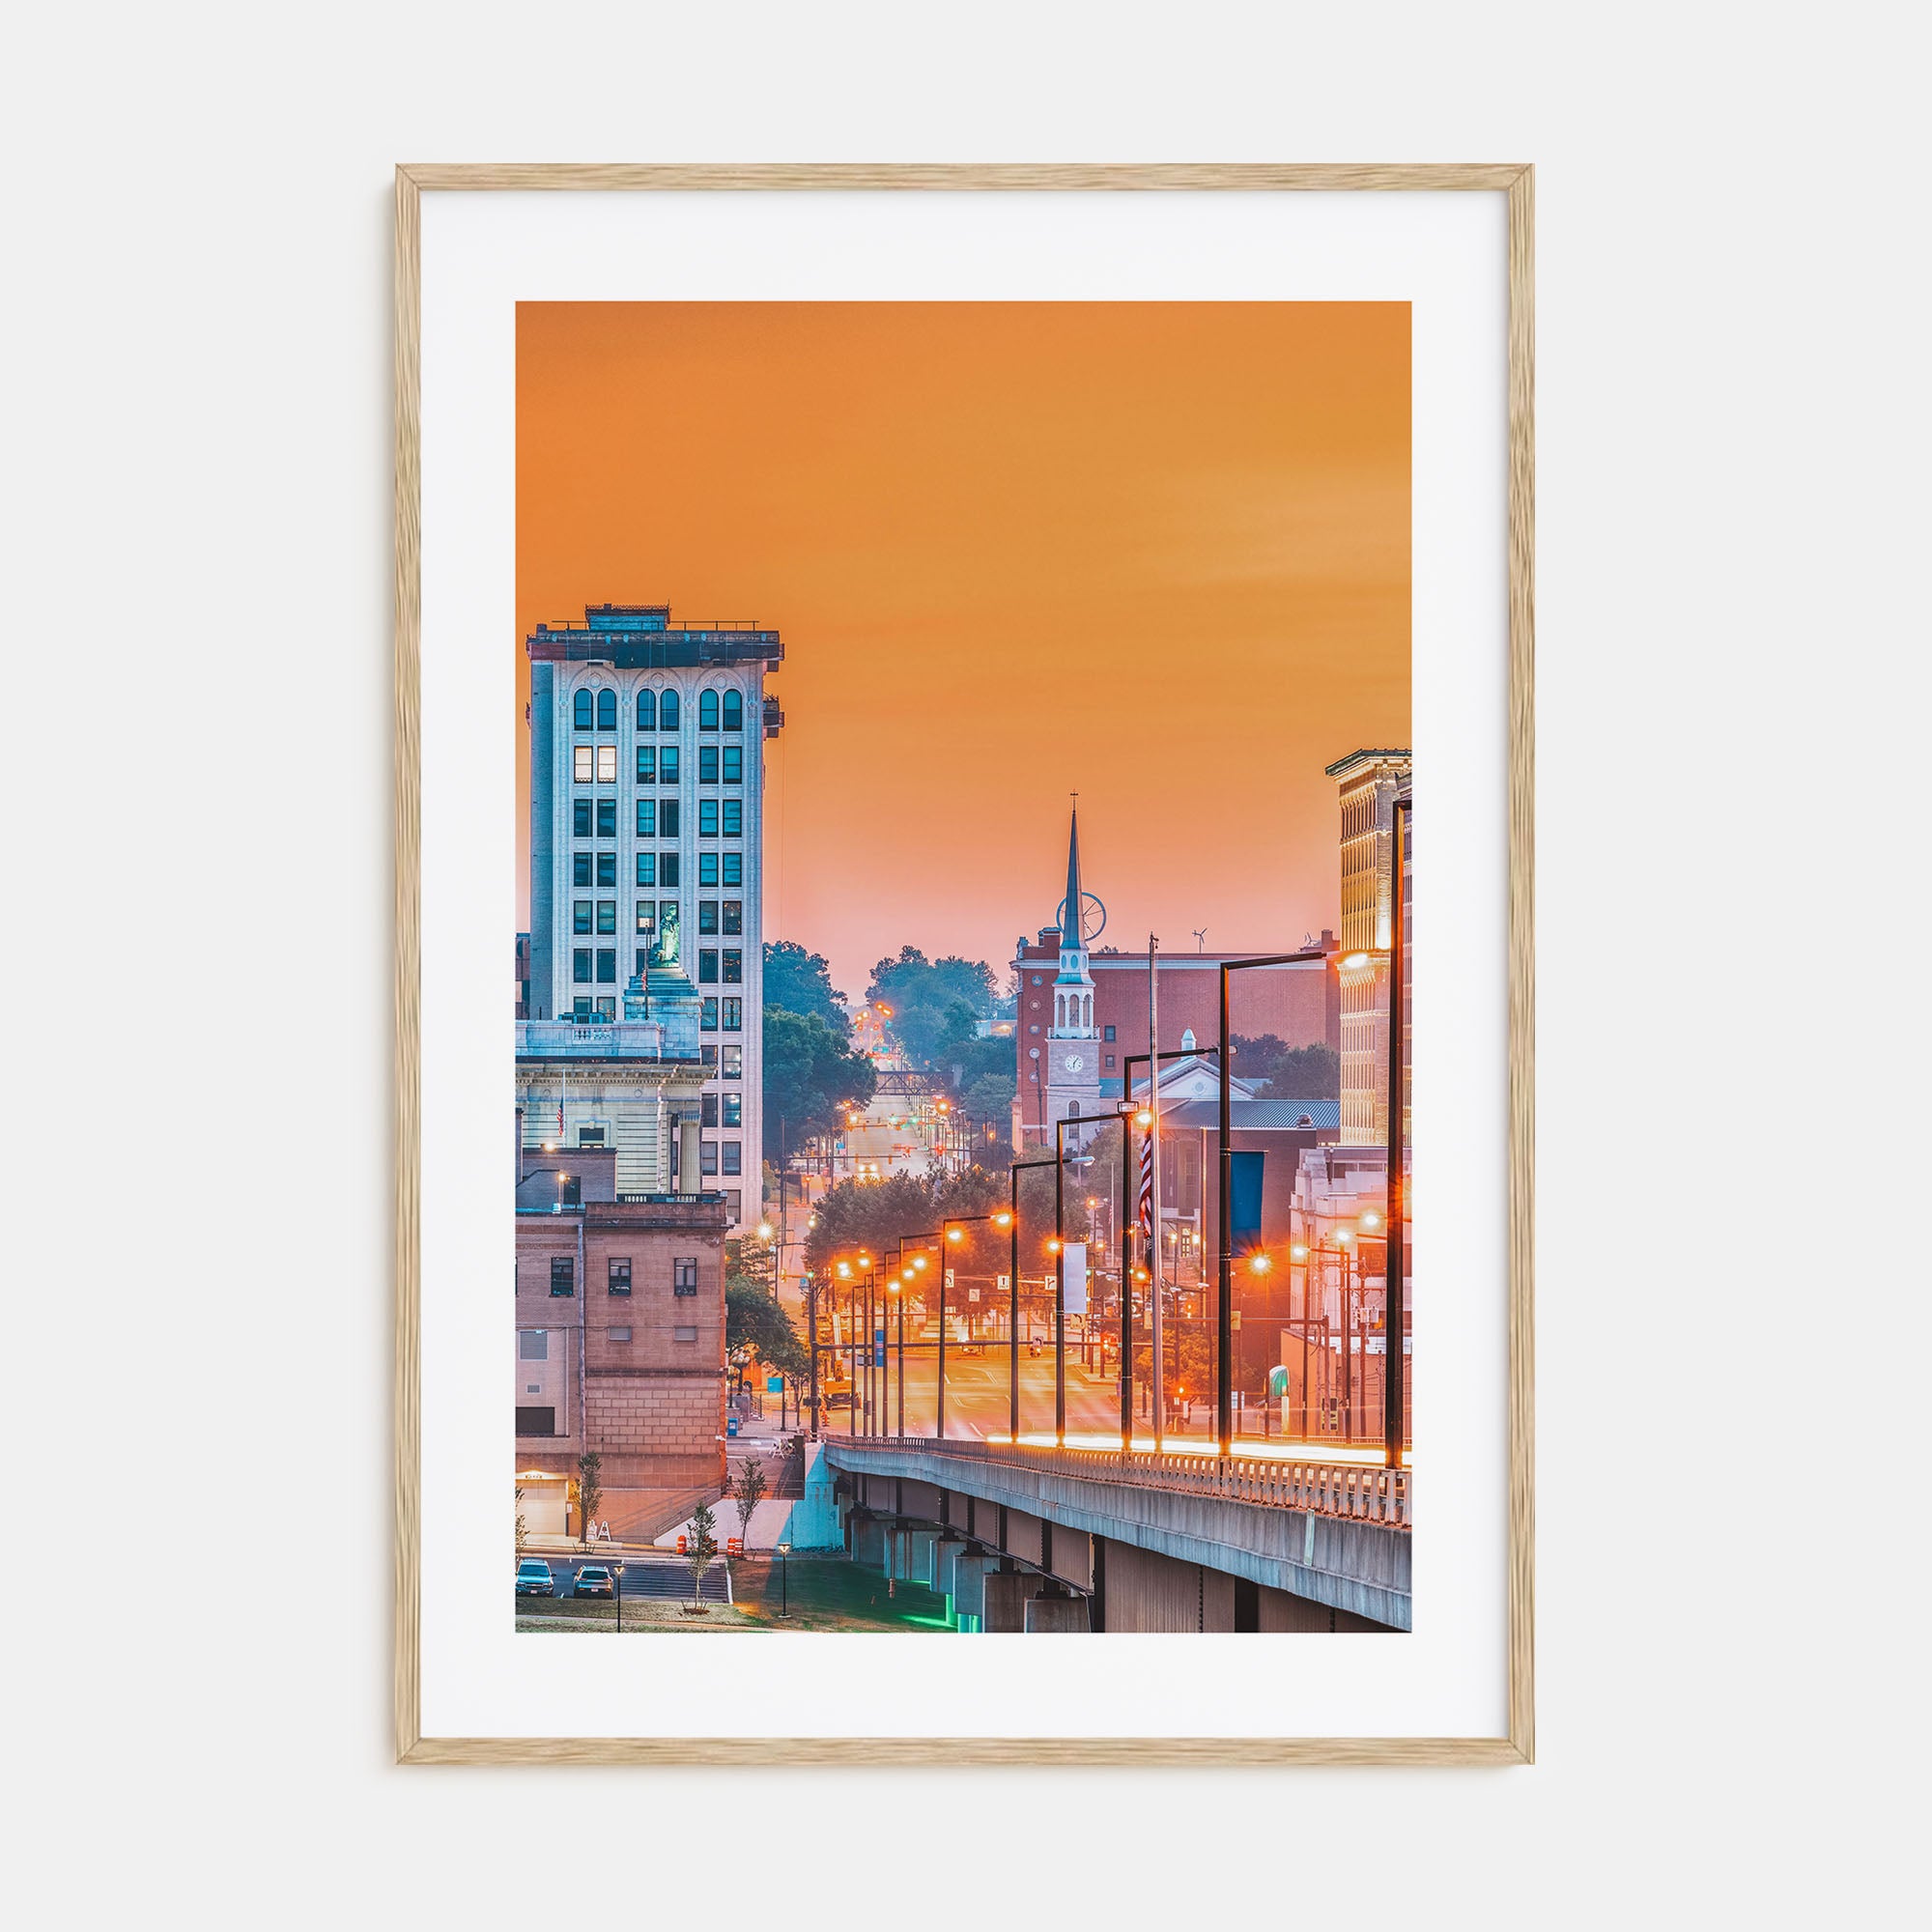 Youngstown Photo Color Poster